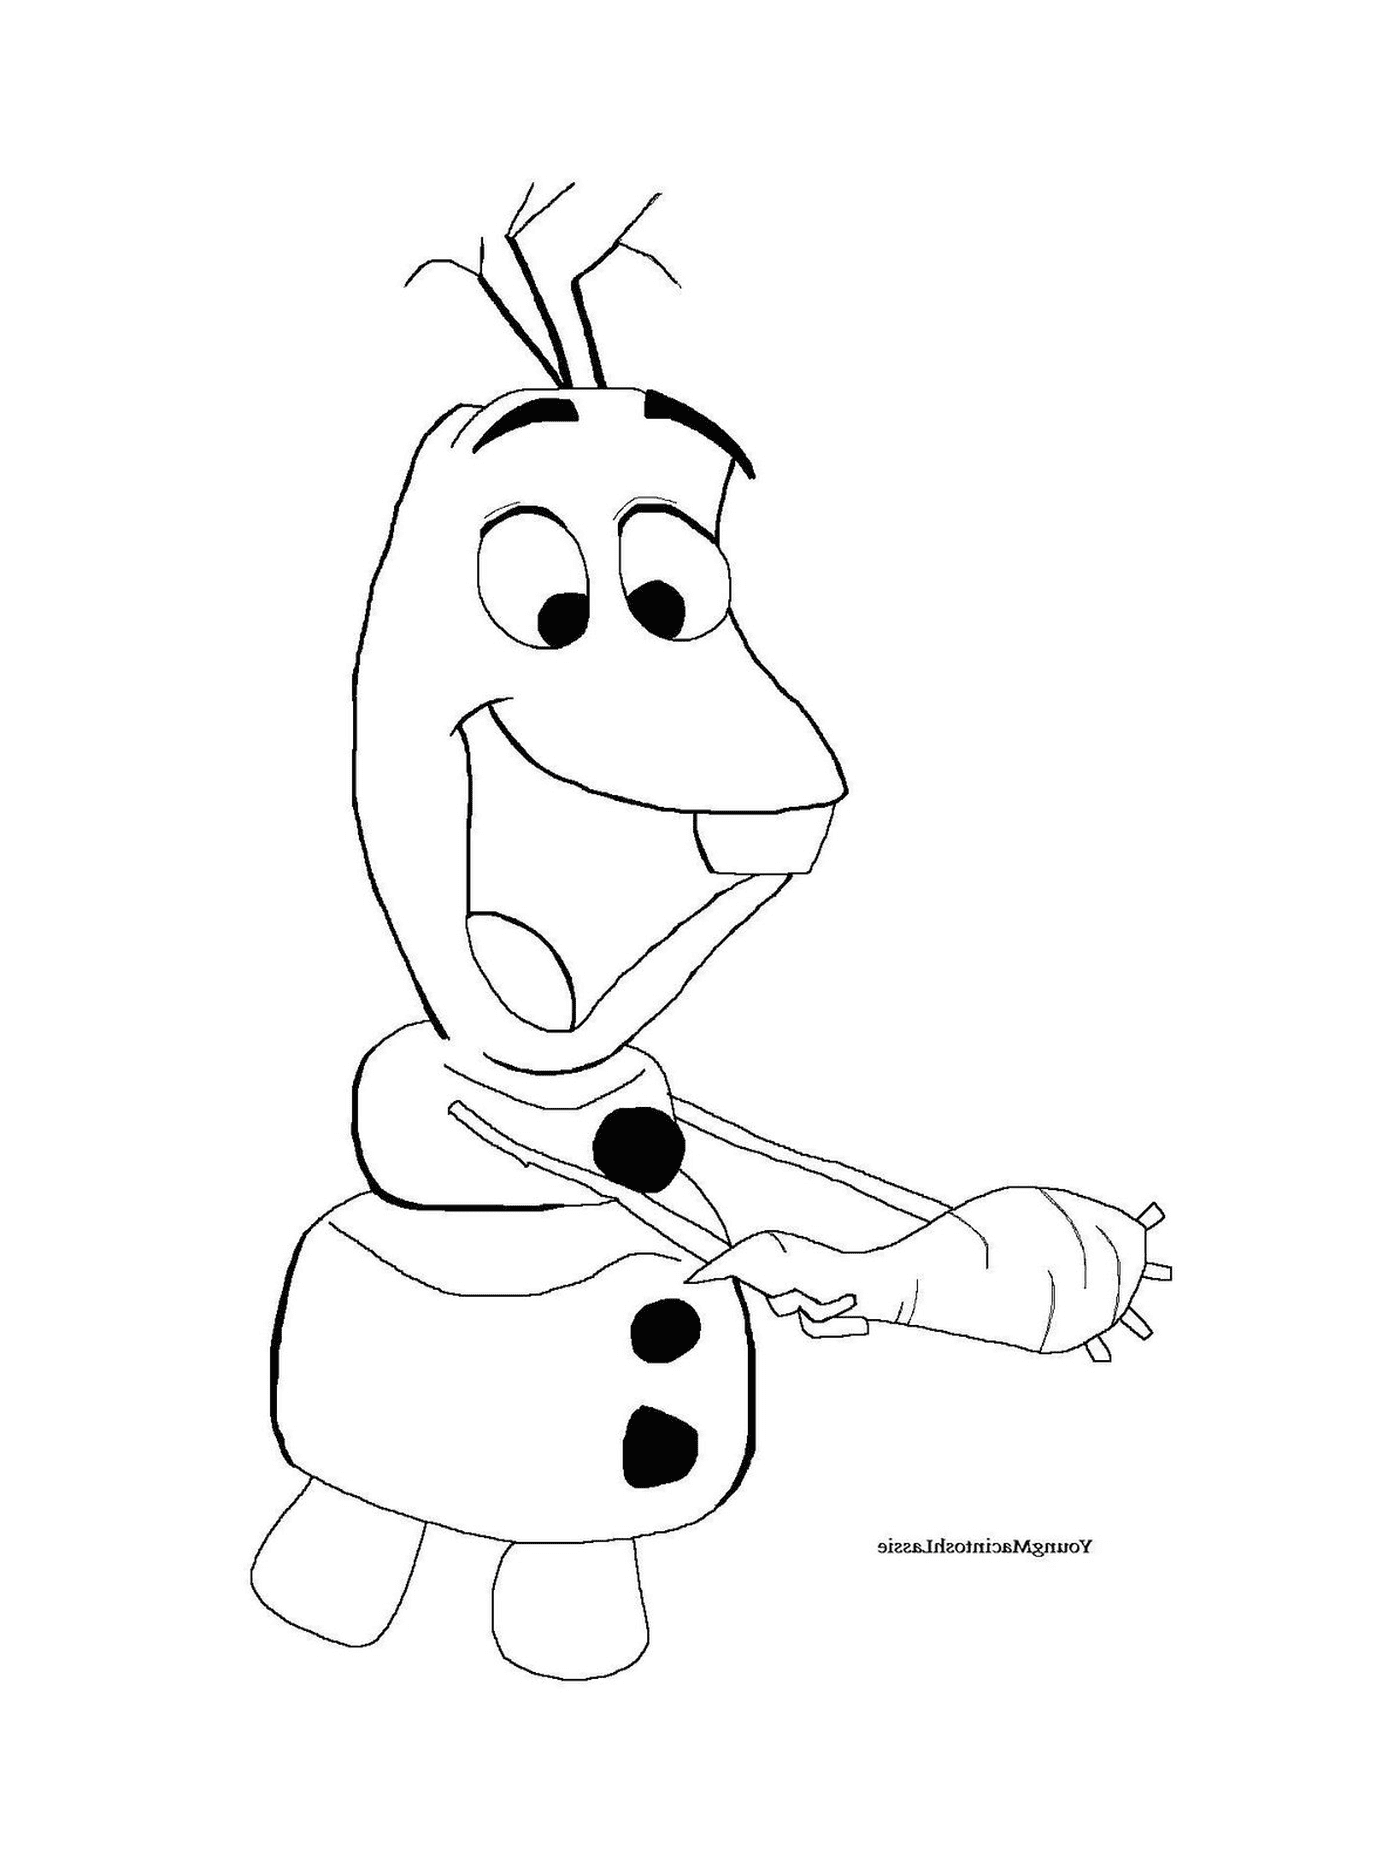  Olaf without nose 